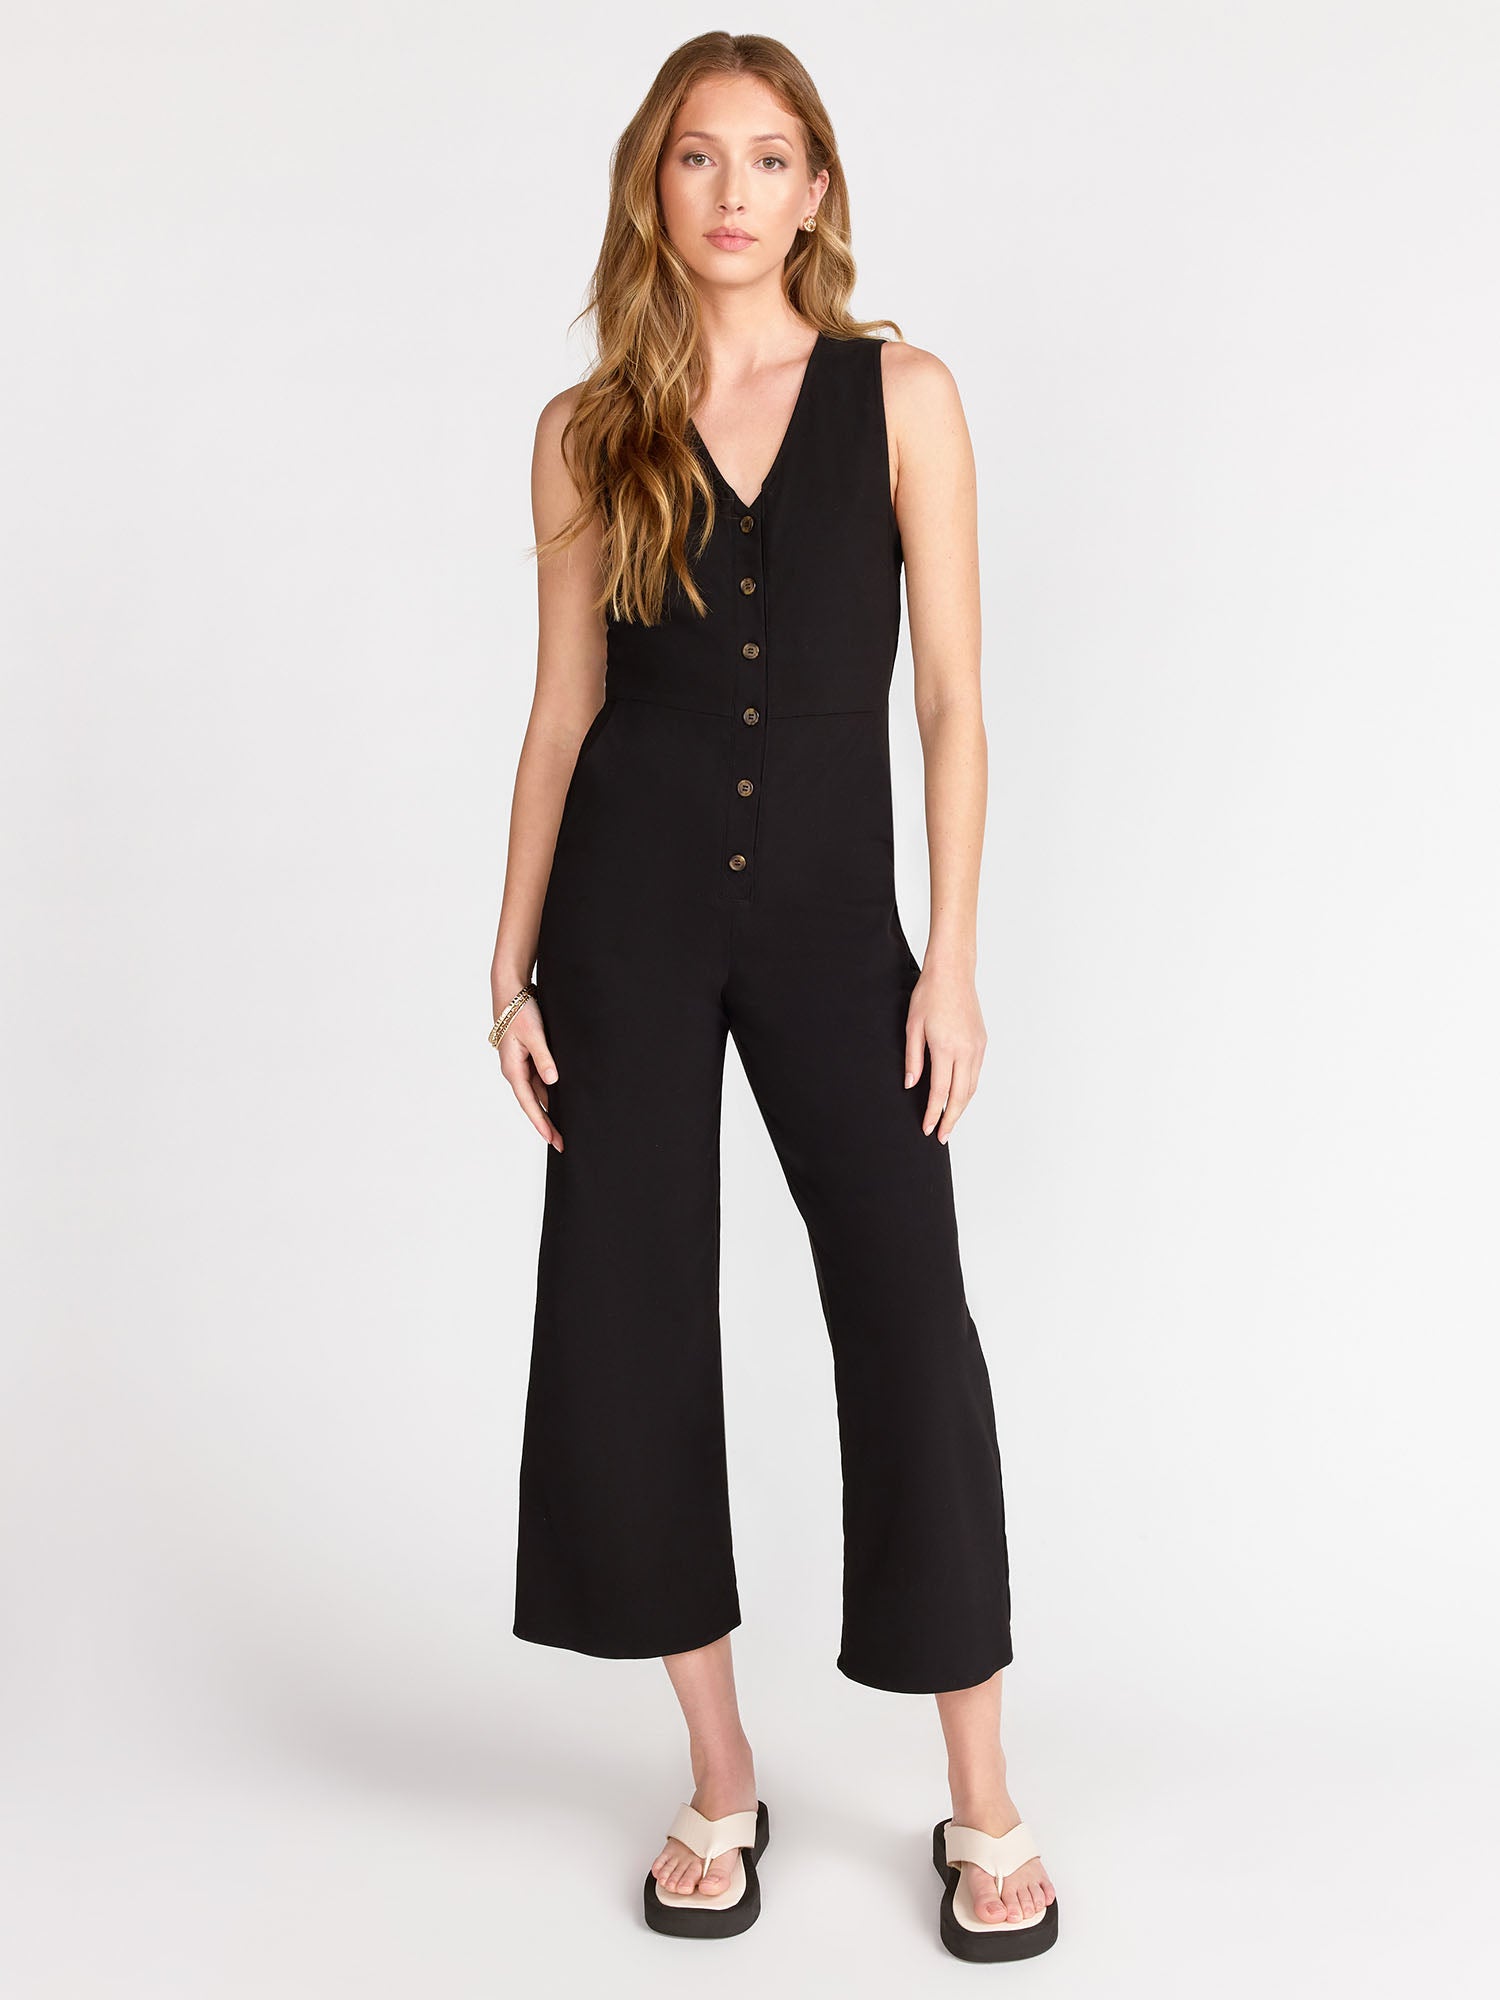 Gilli Sleeveless V-Neck Button Down Jumpsuit - Brands We Love | NY&Co